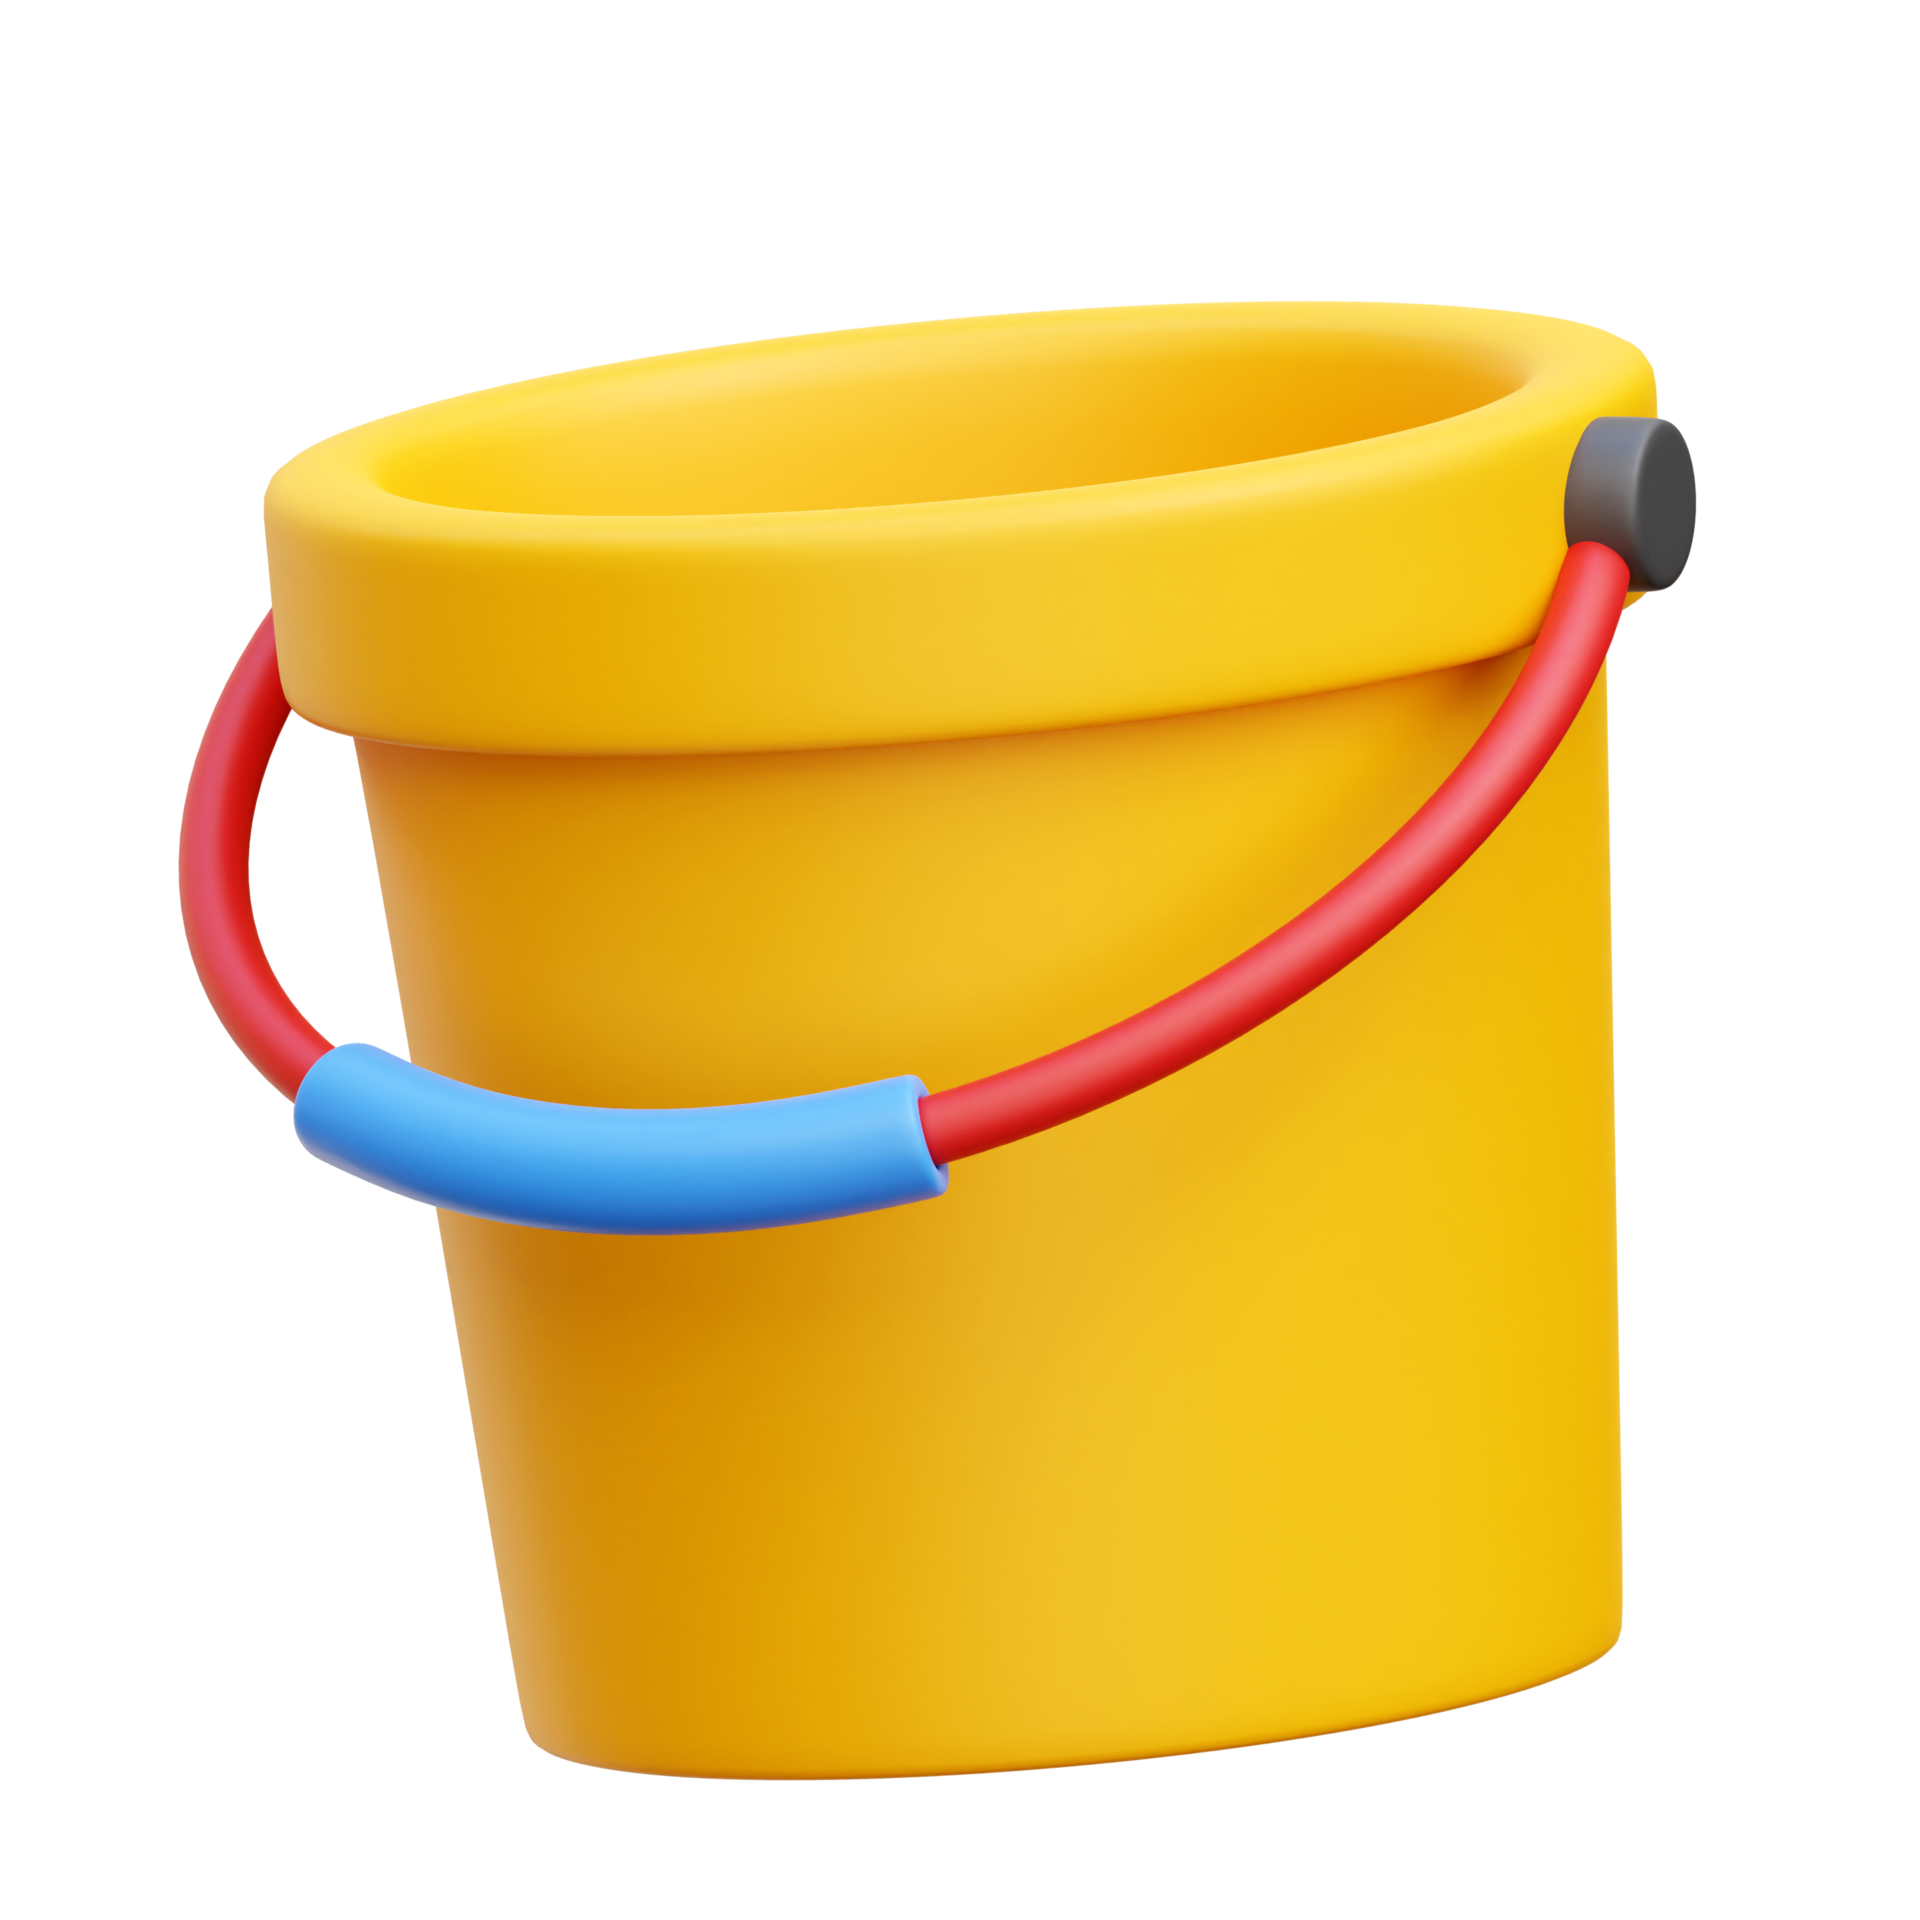 46,135 Small Bucket Images, Stock Photos, 3D objects, & Vectors